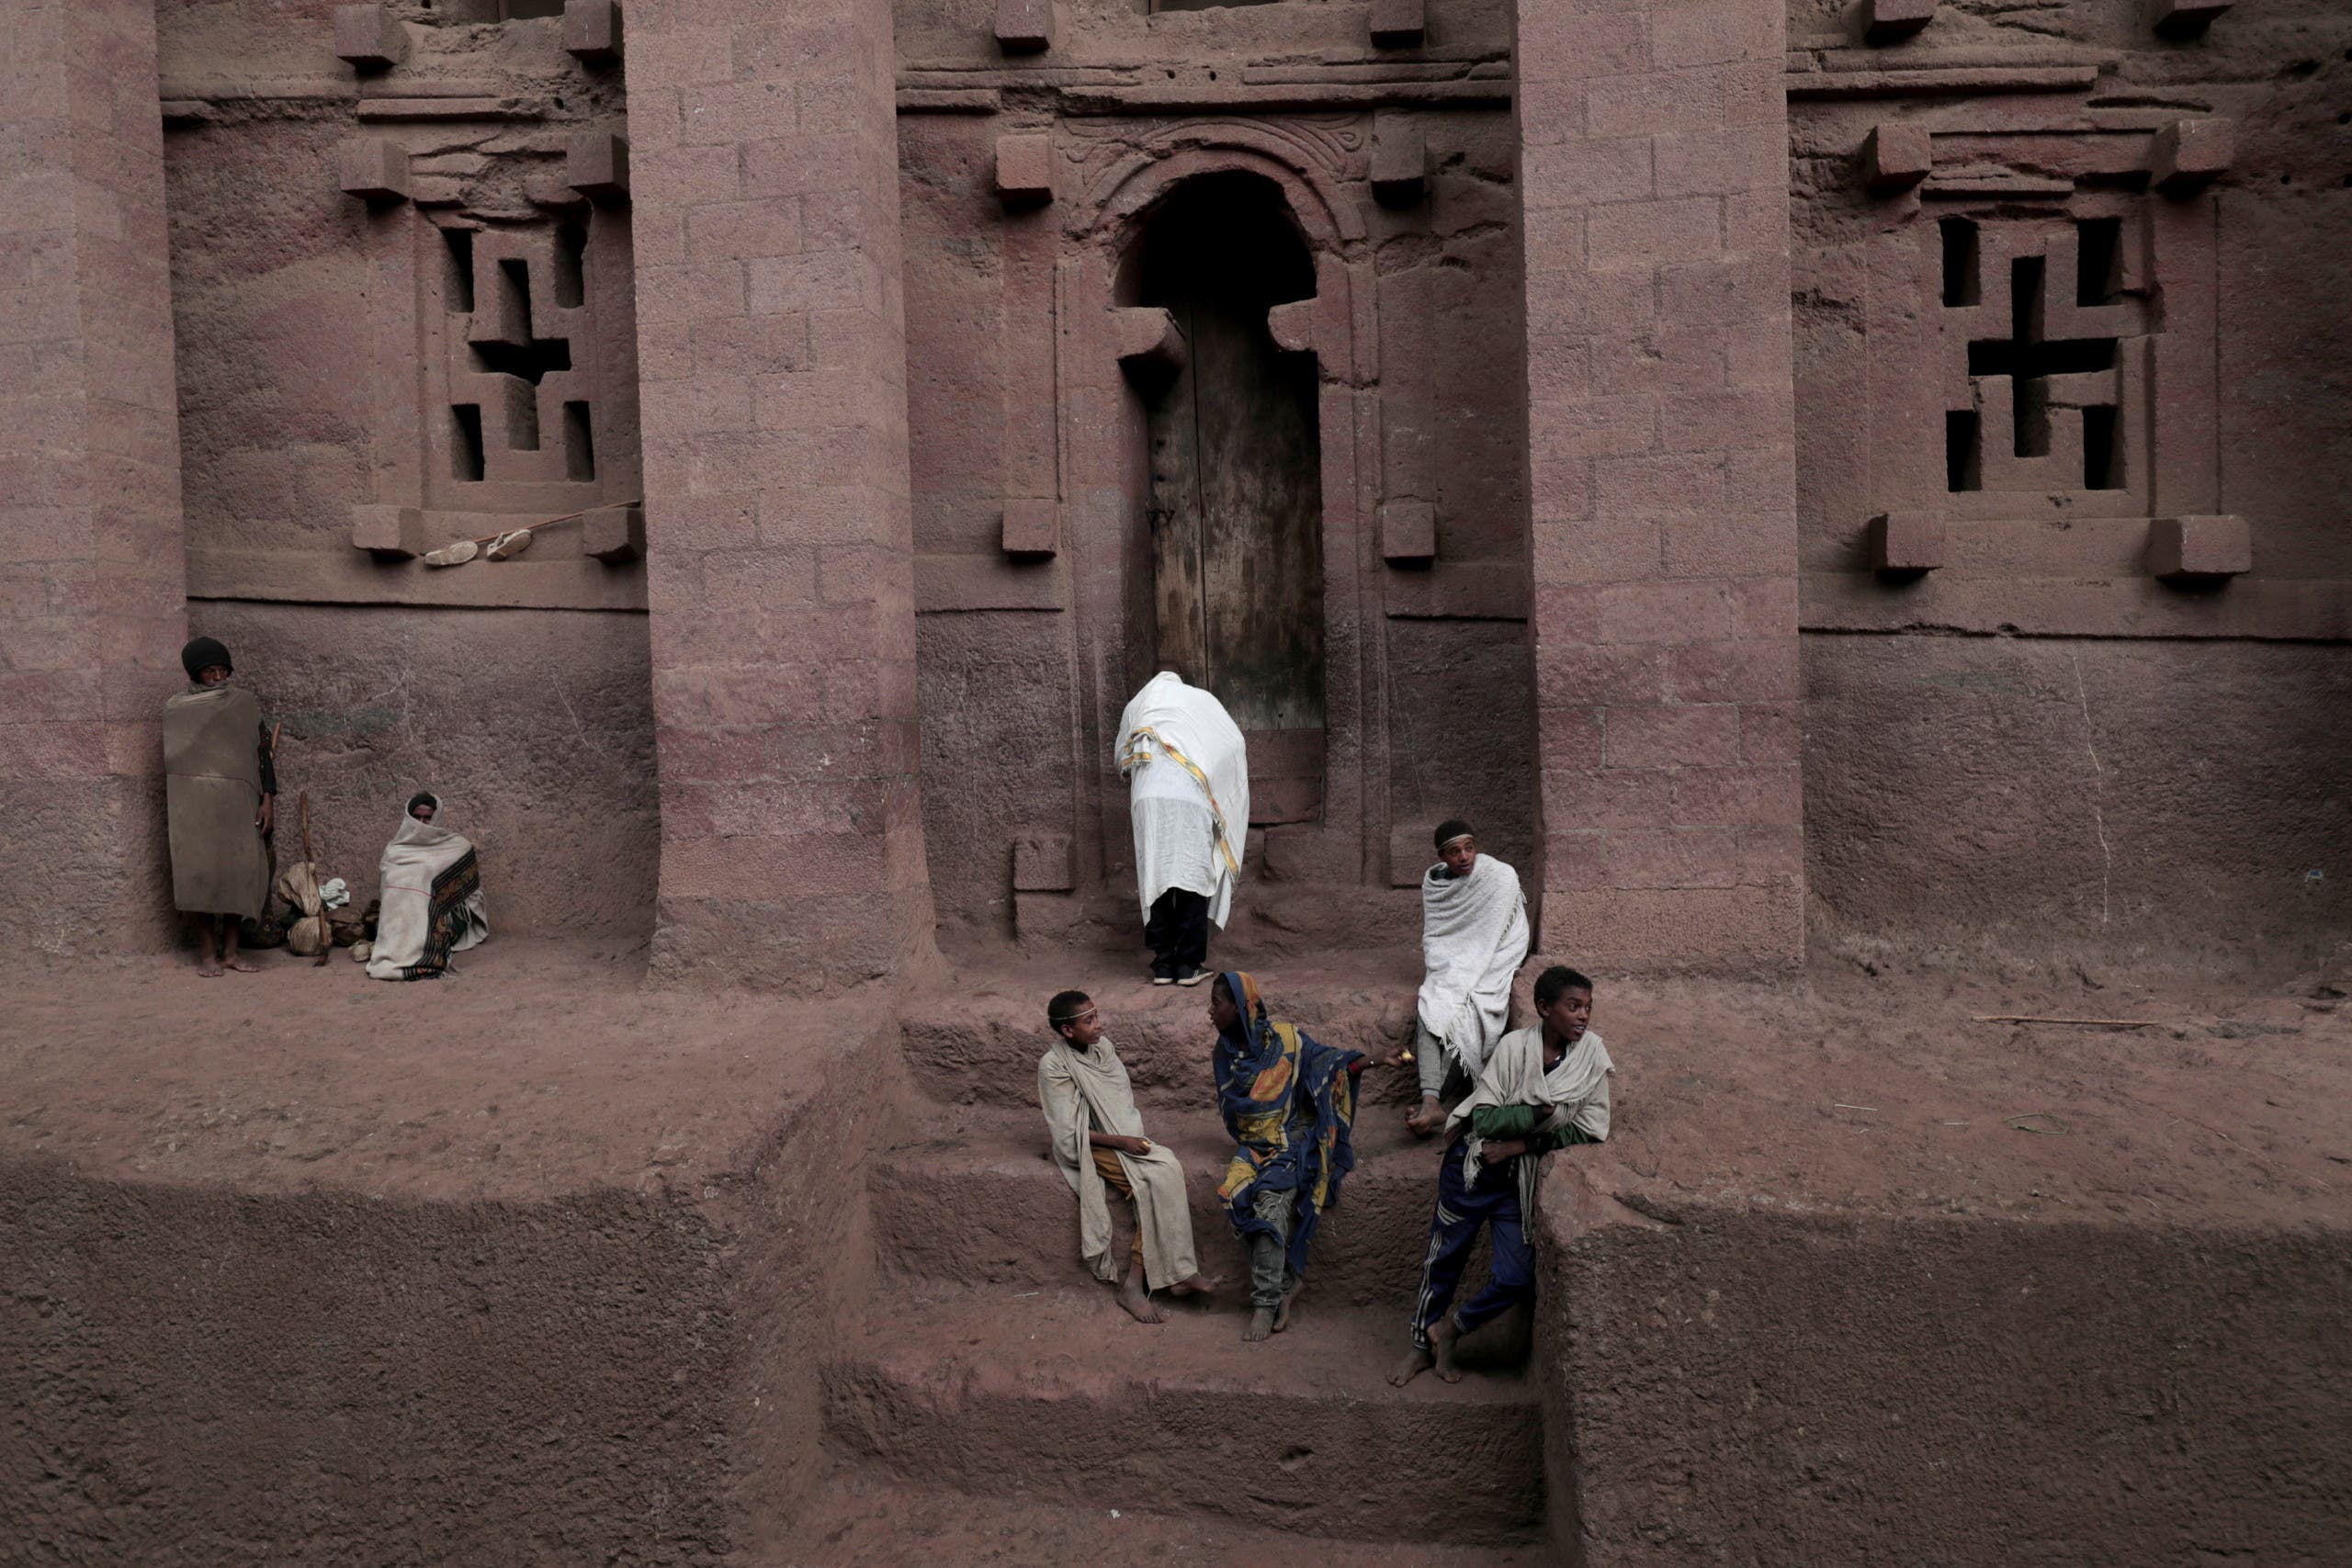 A heritage site in the town of Lalibela